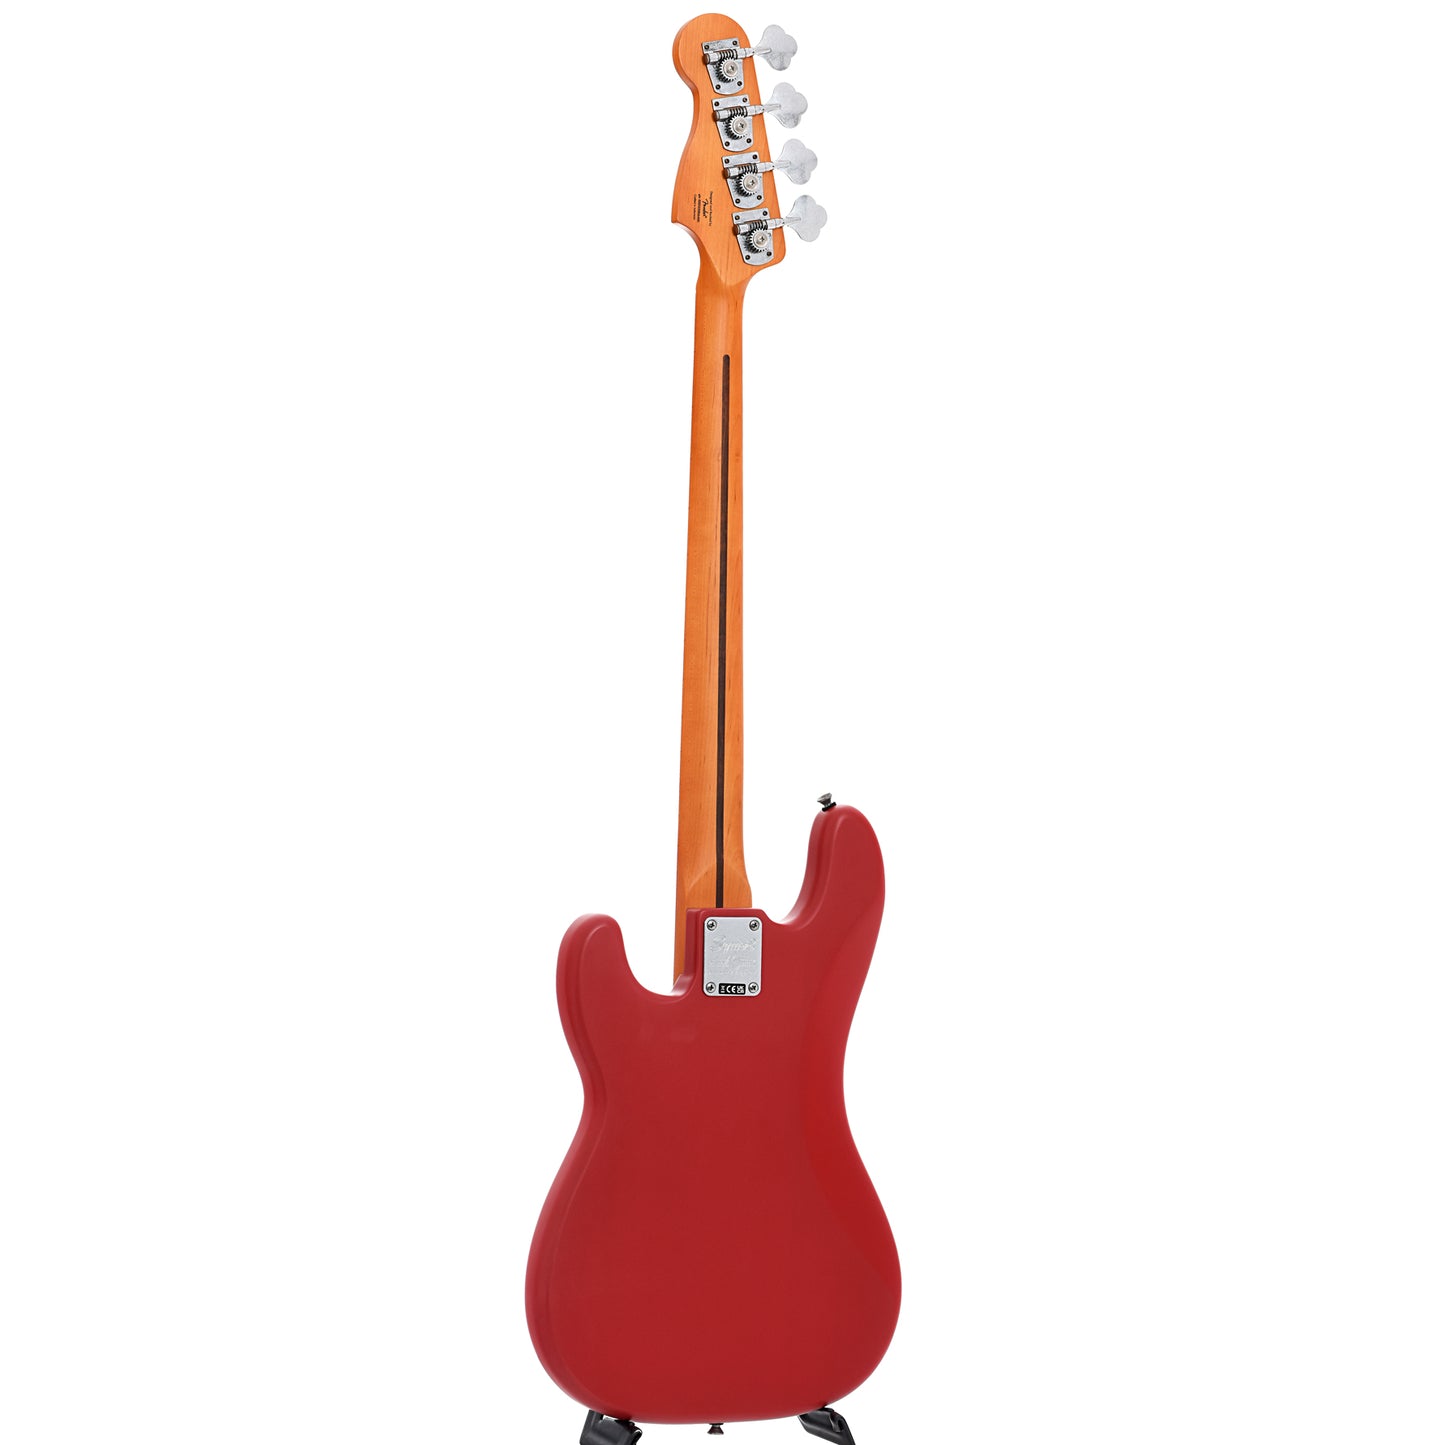 Full back and side of Squier 40th Anniversary Precision Bass, Vintage Edition, Satin Dakota Red